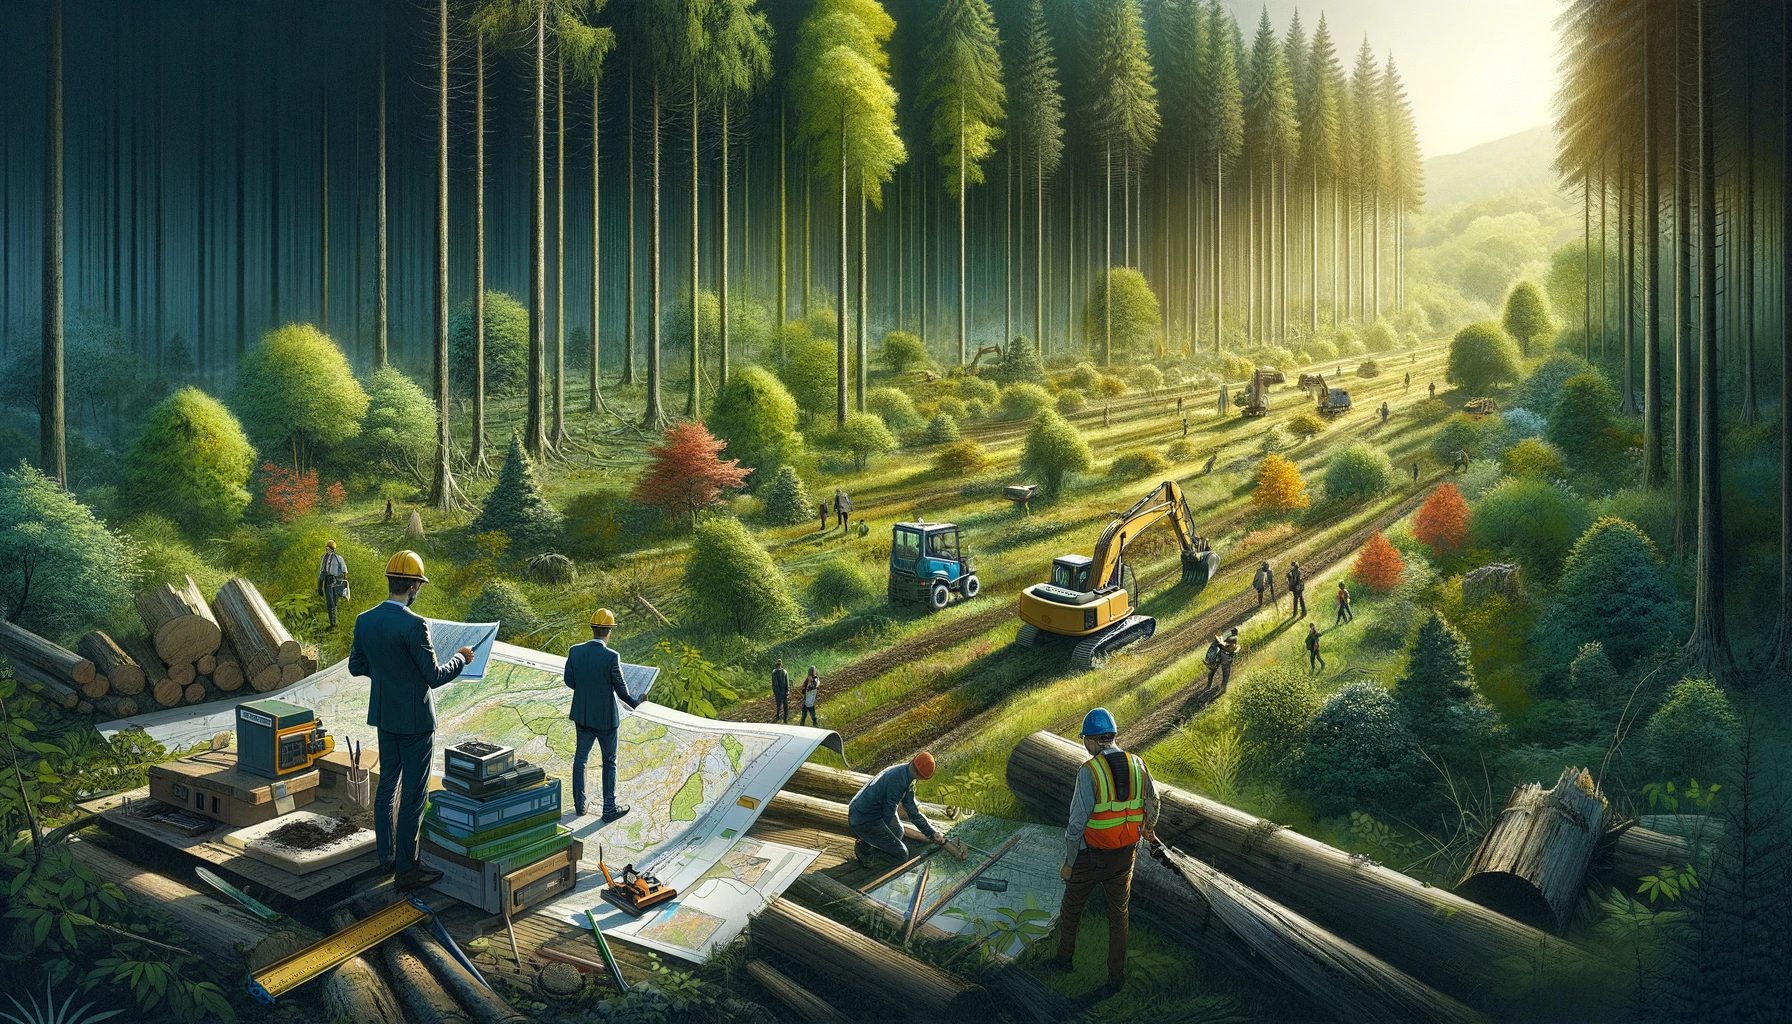 An-artistic-representation-of-a-forest-development-project.-The-image-showcases-a-large-lush-forest-with-a-variety-of-trees-undergrowth-and-wildlif